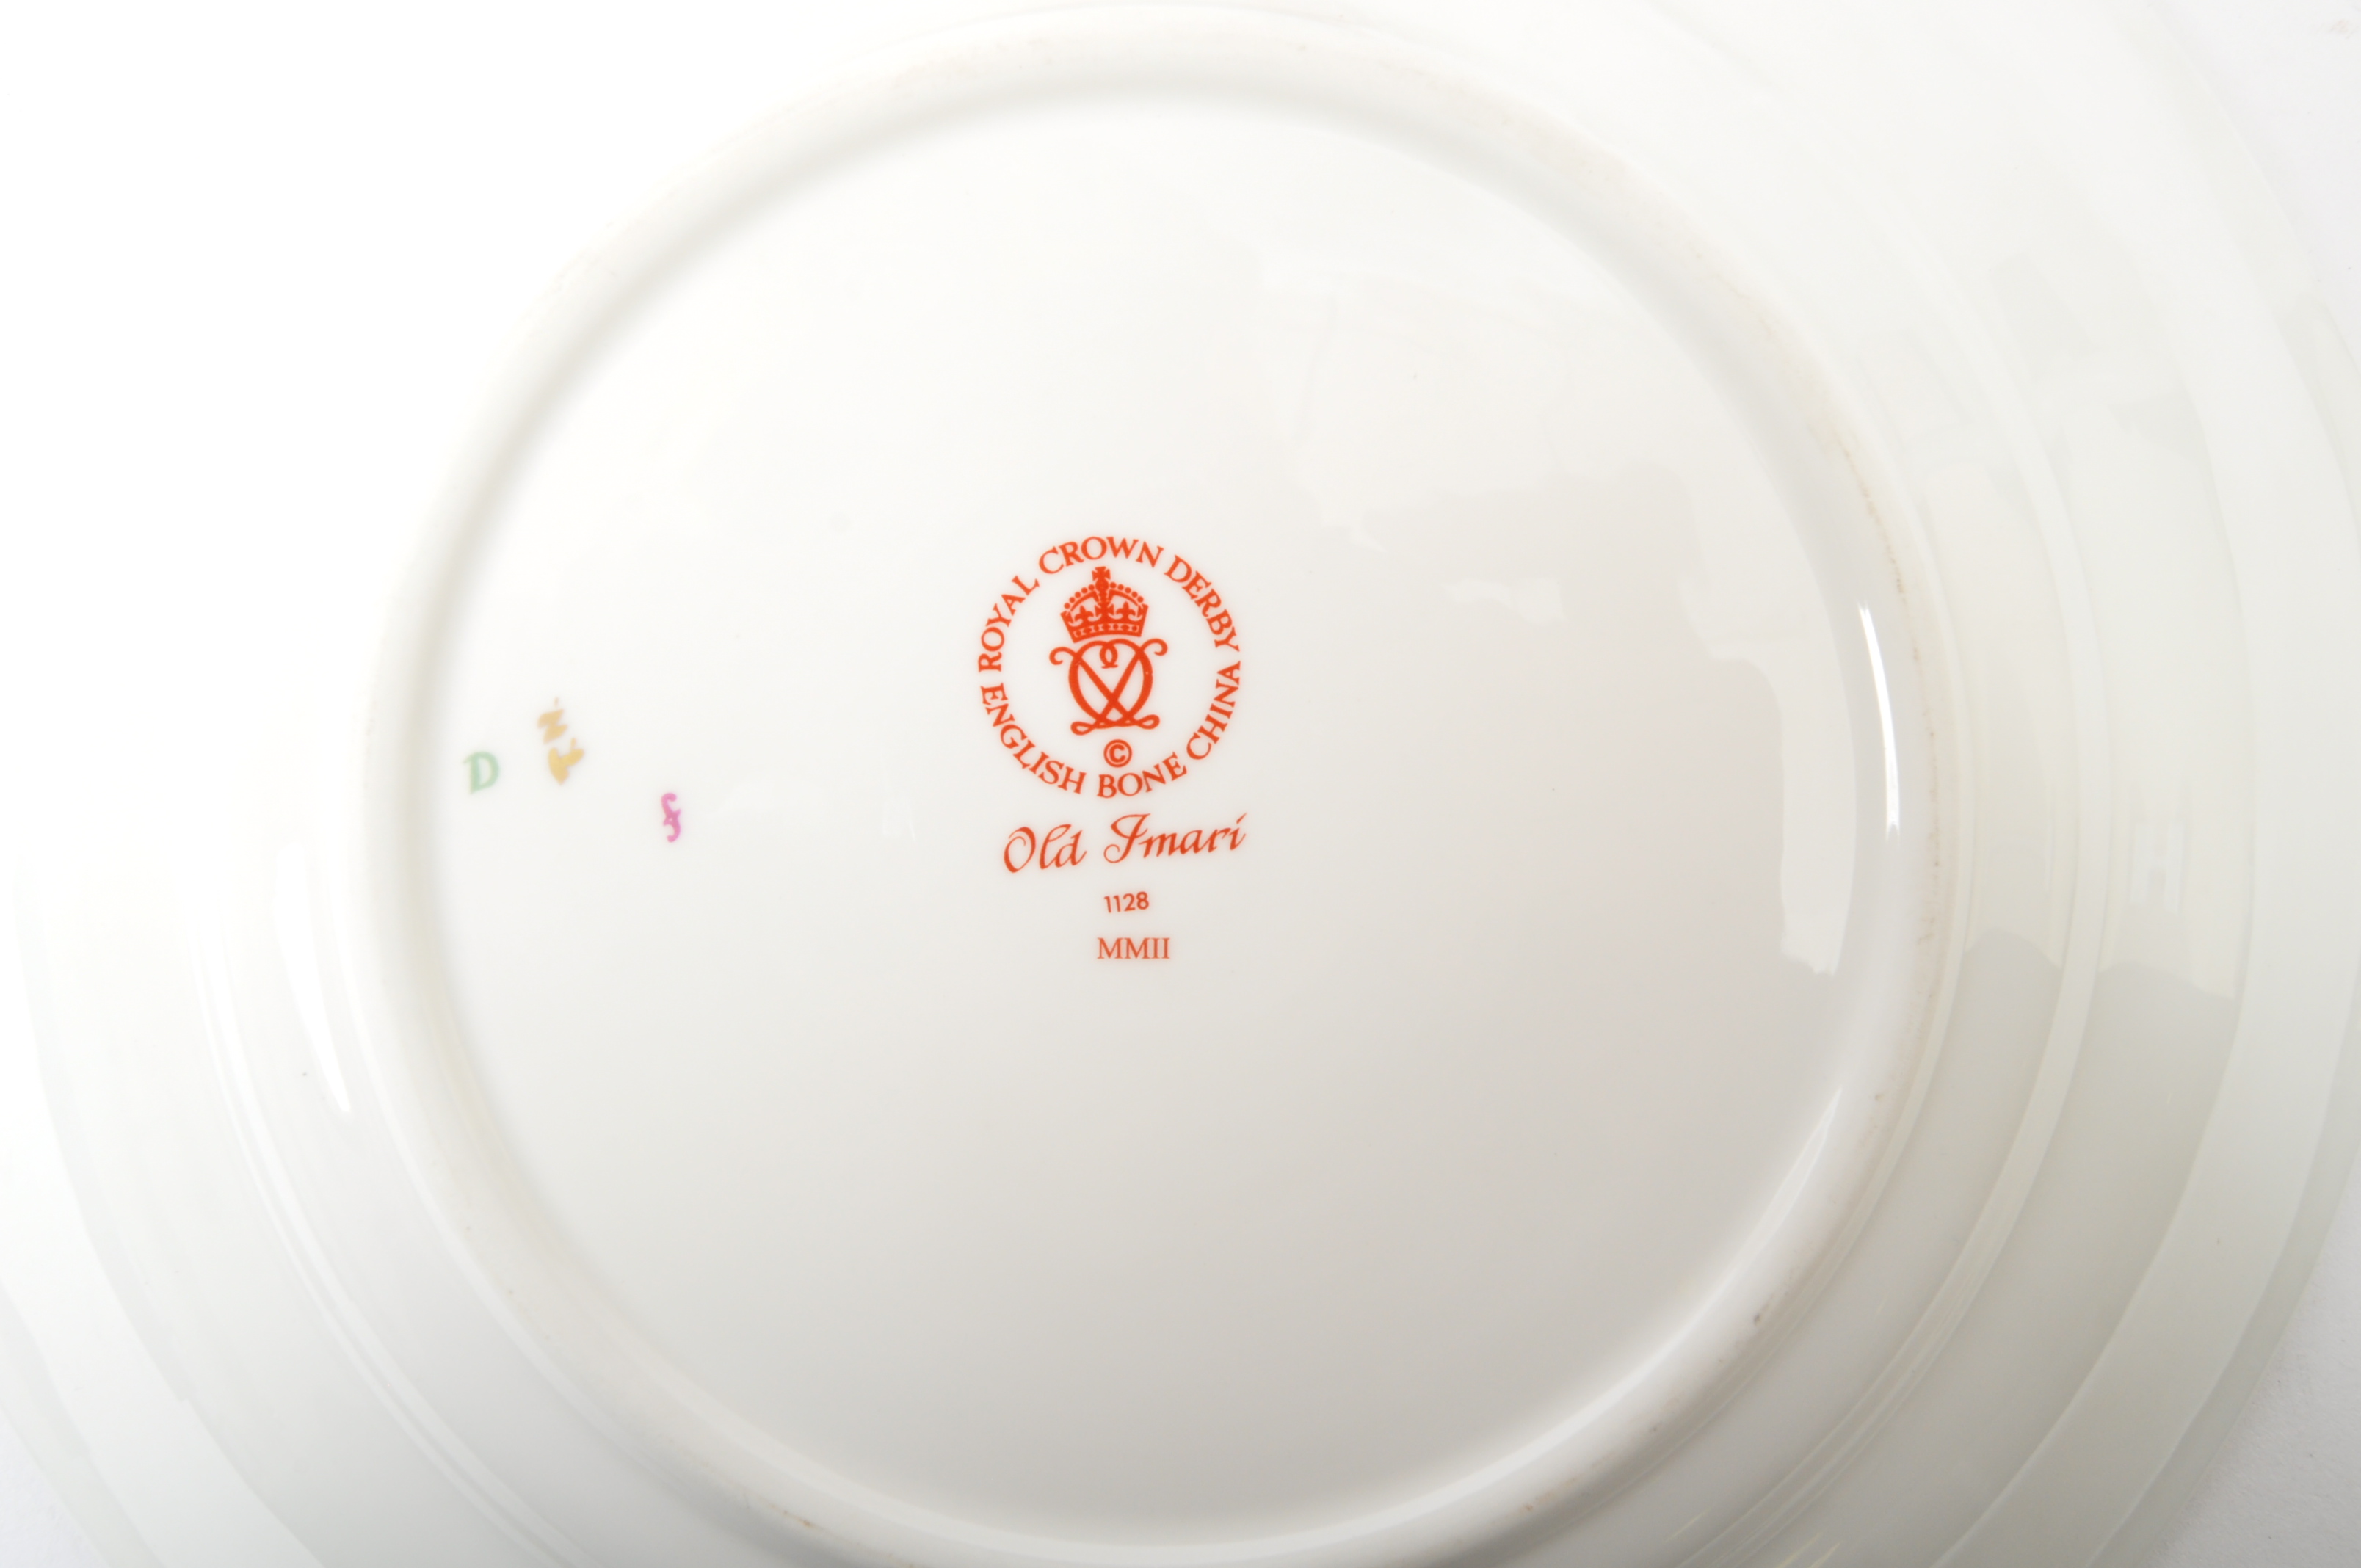 CONTEMPORARY ROYAL CROWN DERBY CHINA SERVING DESSERT PLATE - Image 3 of 5